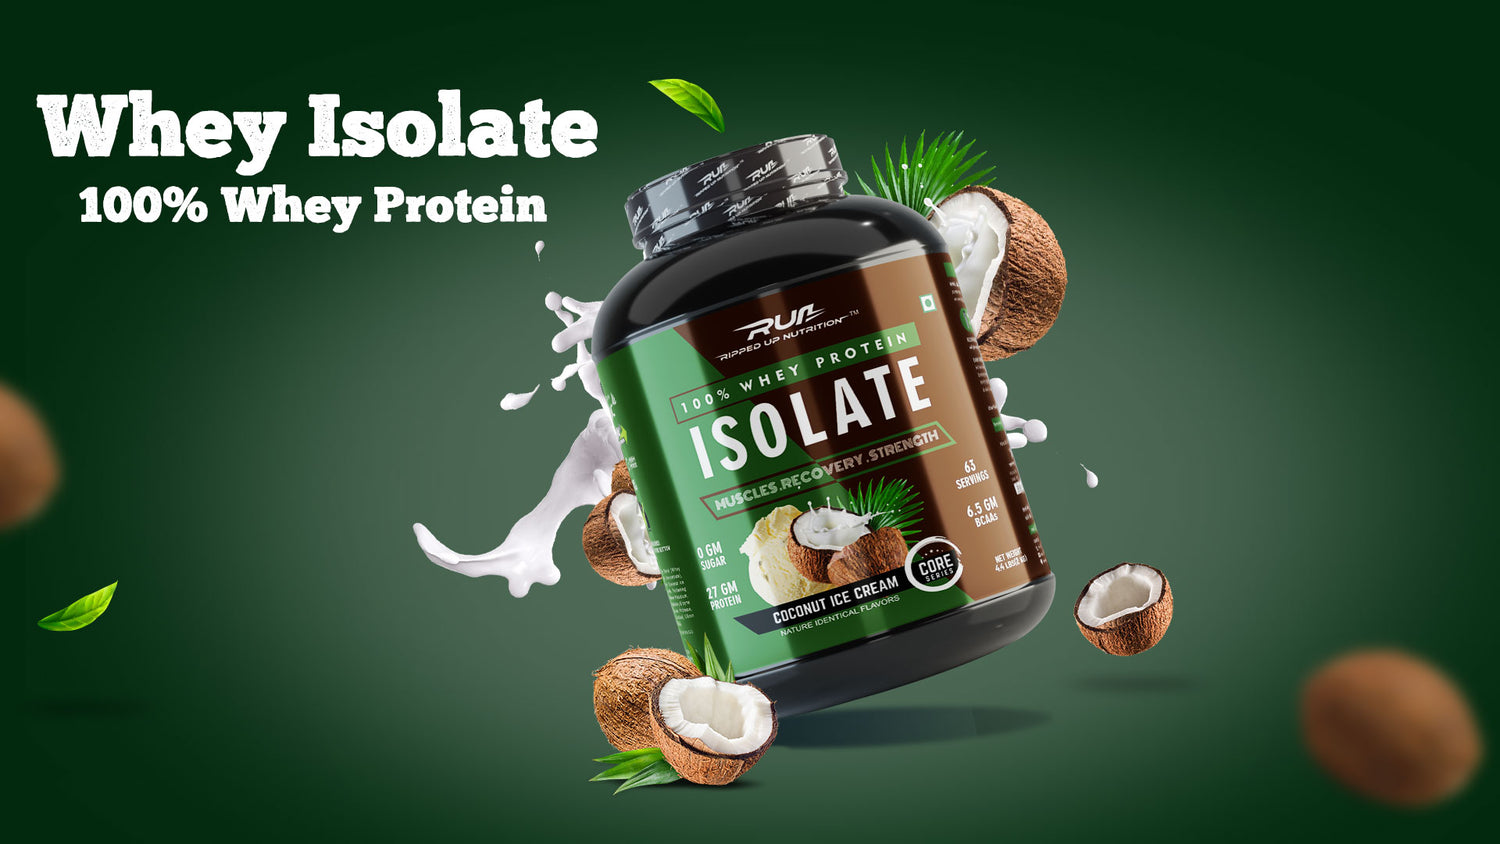 Benefits of Whey Protein Isolate: And Why it is the ‘Whey’ To Go